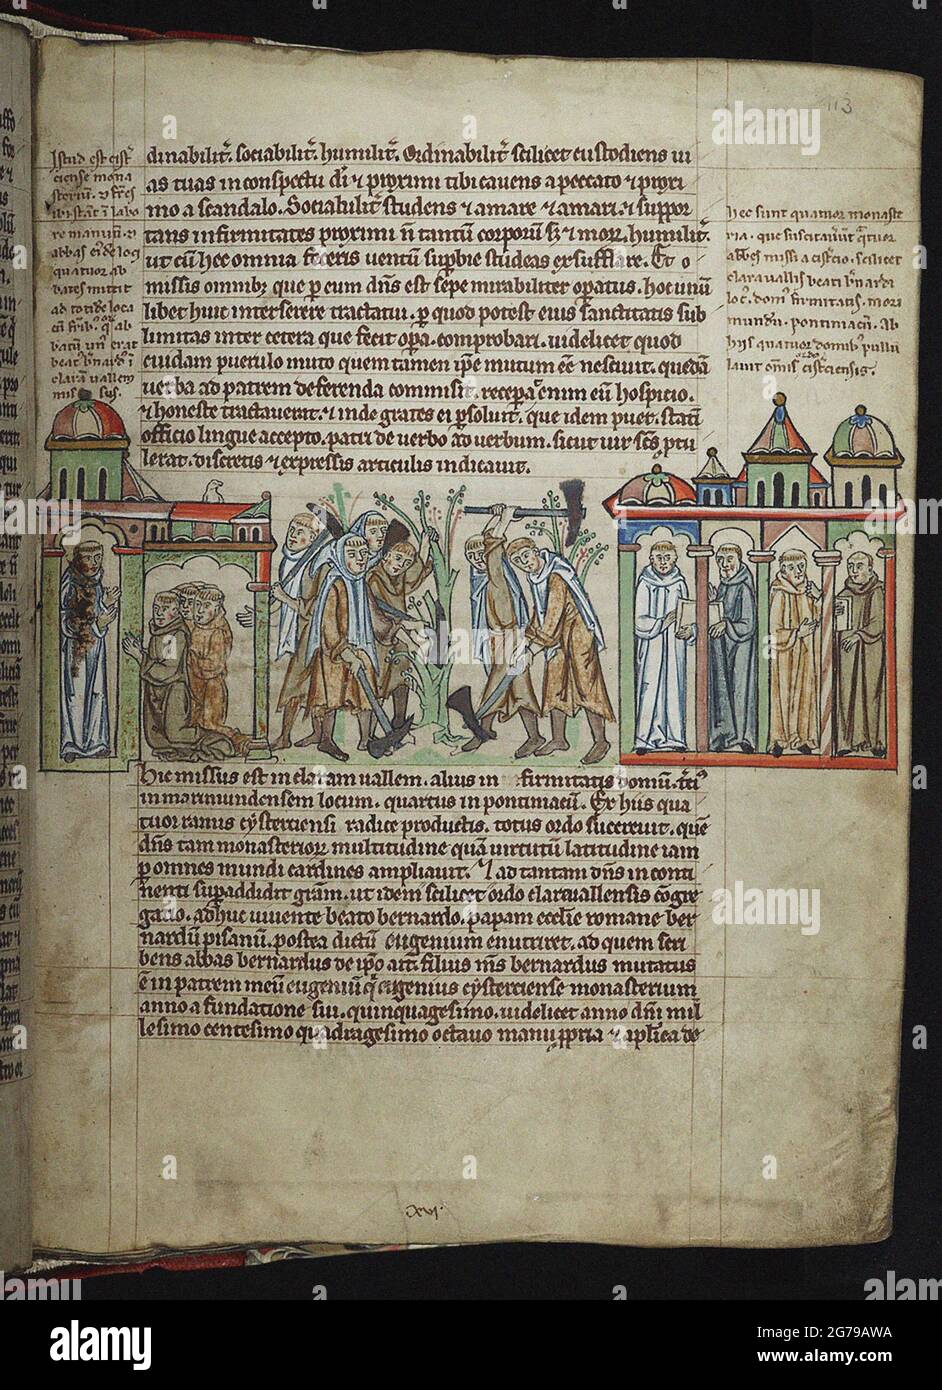 Bernard of Clairvaux sending monks to daughter houses, Cistercian monks. From: Expositio in Apocalypsim by Alexander of Bremen. Museum: Cambridge University Library. Author: ANONYMOUS. Stock Photo